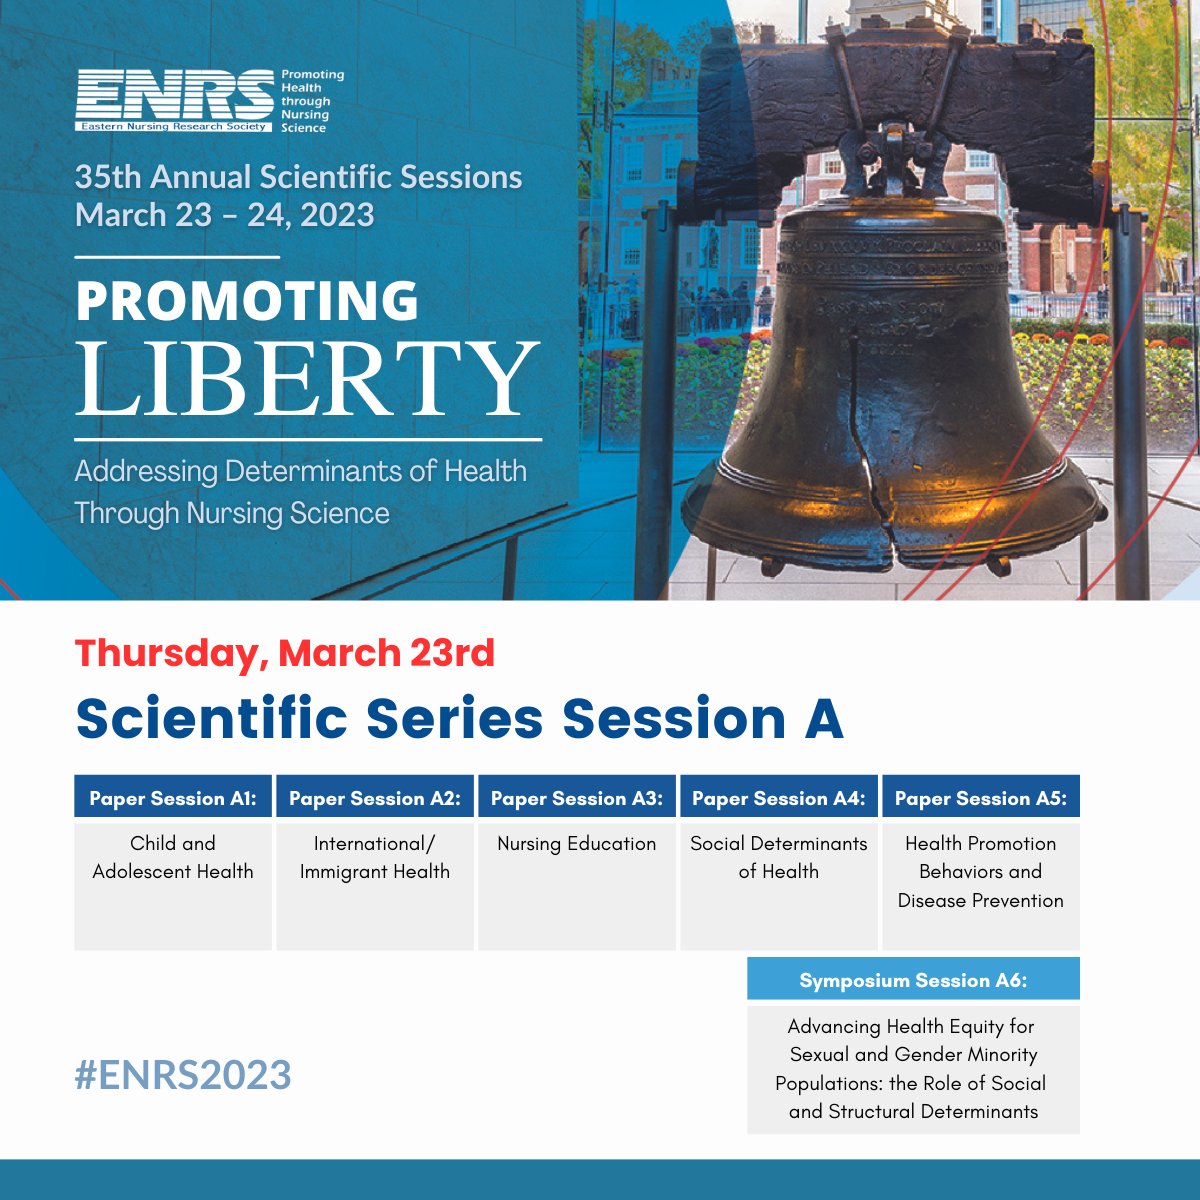 The first paper session at #ENRS2023 Scientific Session has something for everyone! Learn from our exceptional presenters on any of these topics on Thursday, March 23rd 1:15 PM ET! Register: enrs.memberclicks.net/2023-conference